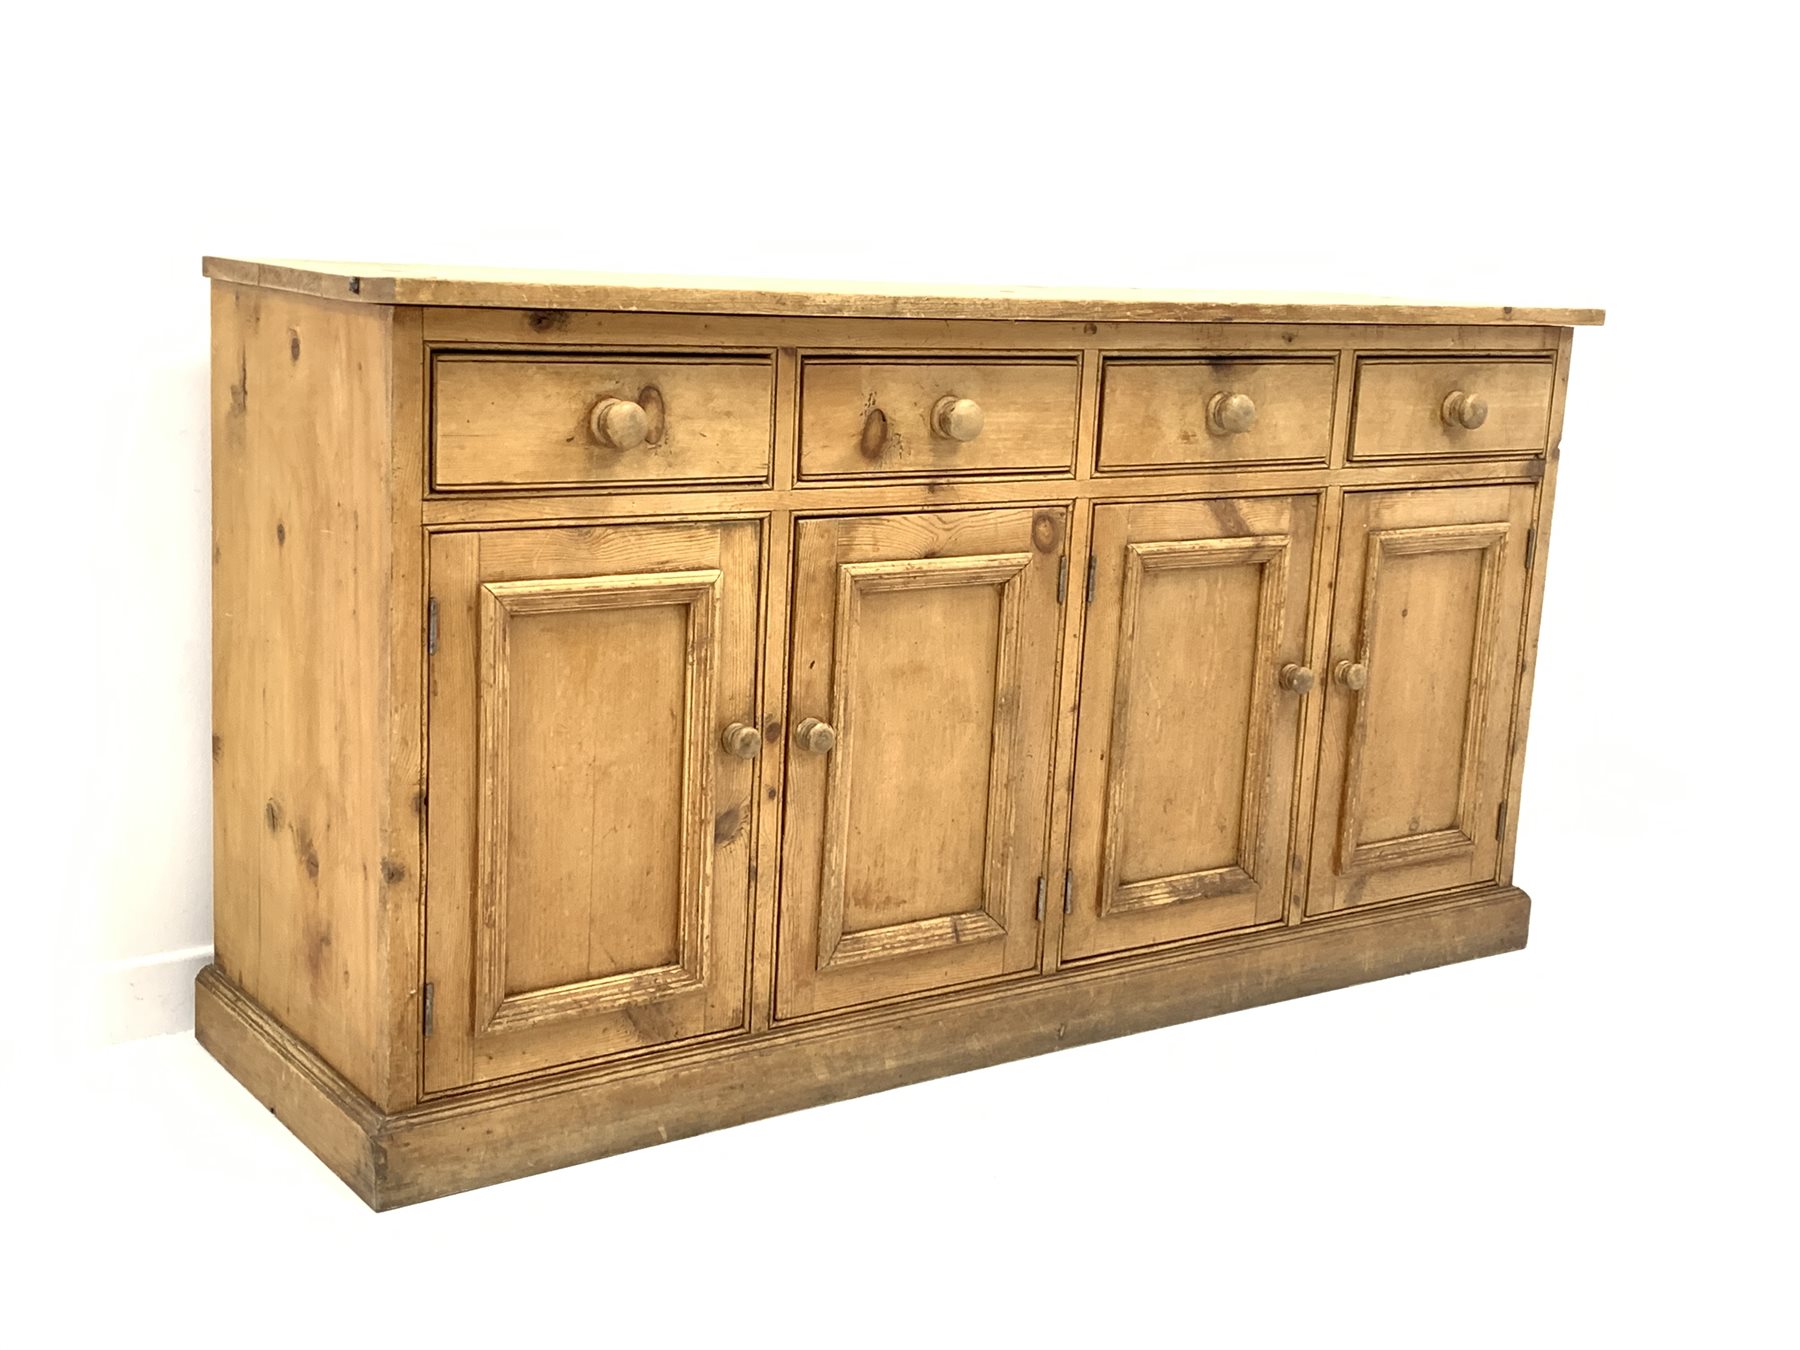 Victorian solid pine dresser base with four drawers over four cupboards, plinth base, W169cm, H89cm